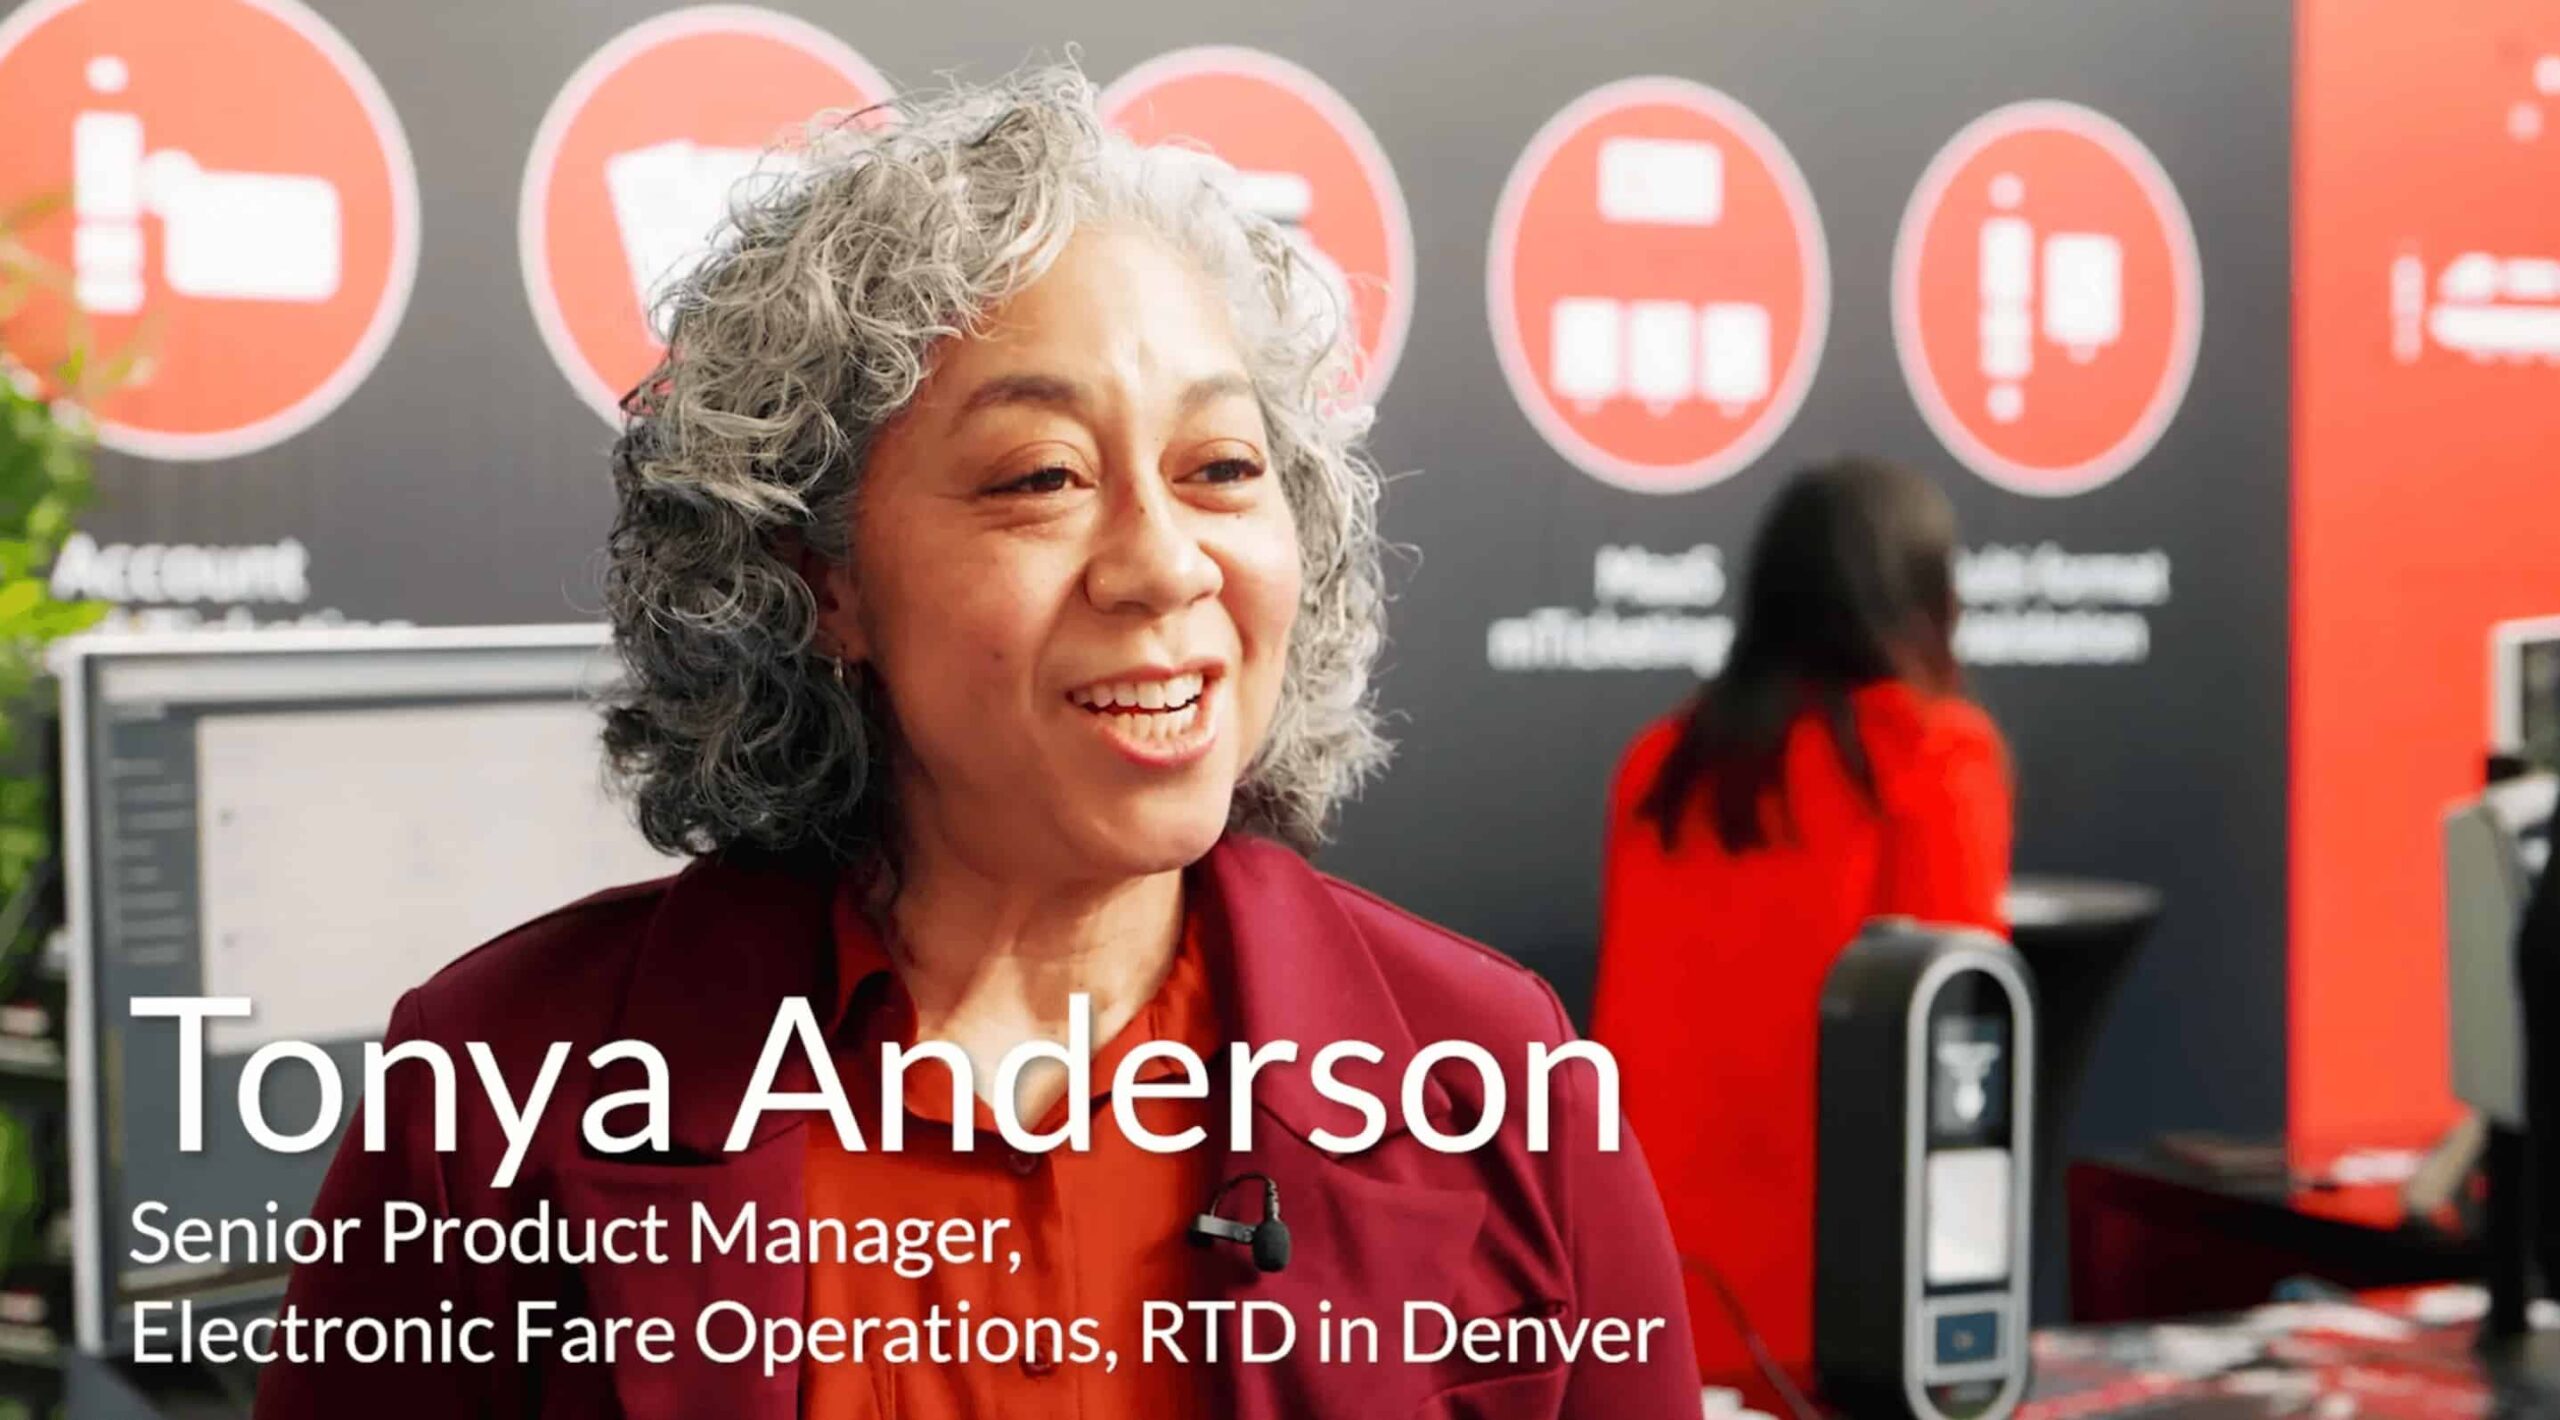 Tonya Anderson, Senior Product Manager of Electronic Fare Operations at the RTD in Denver